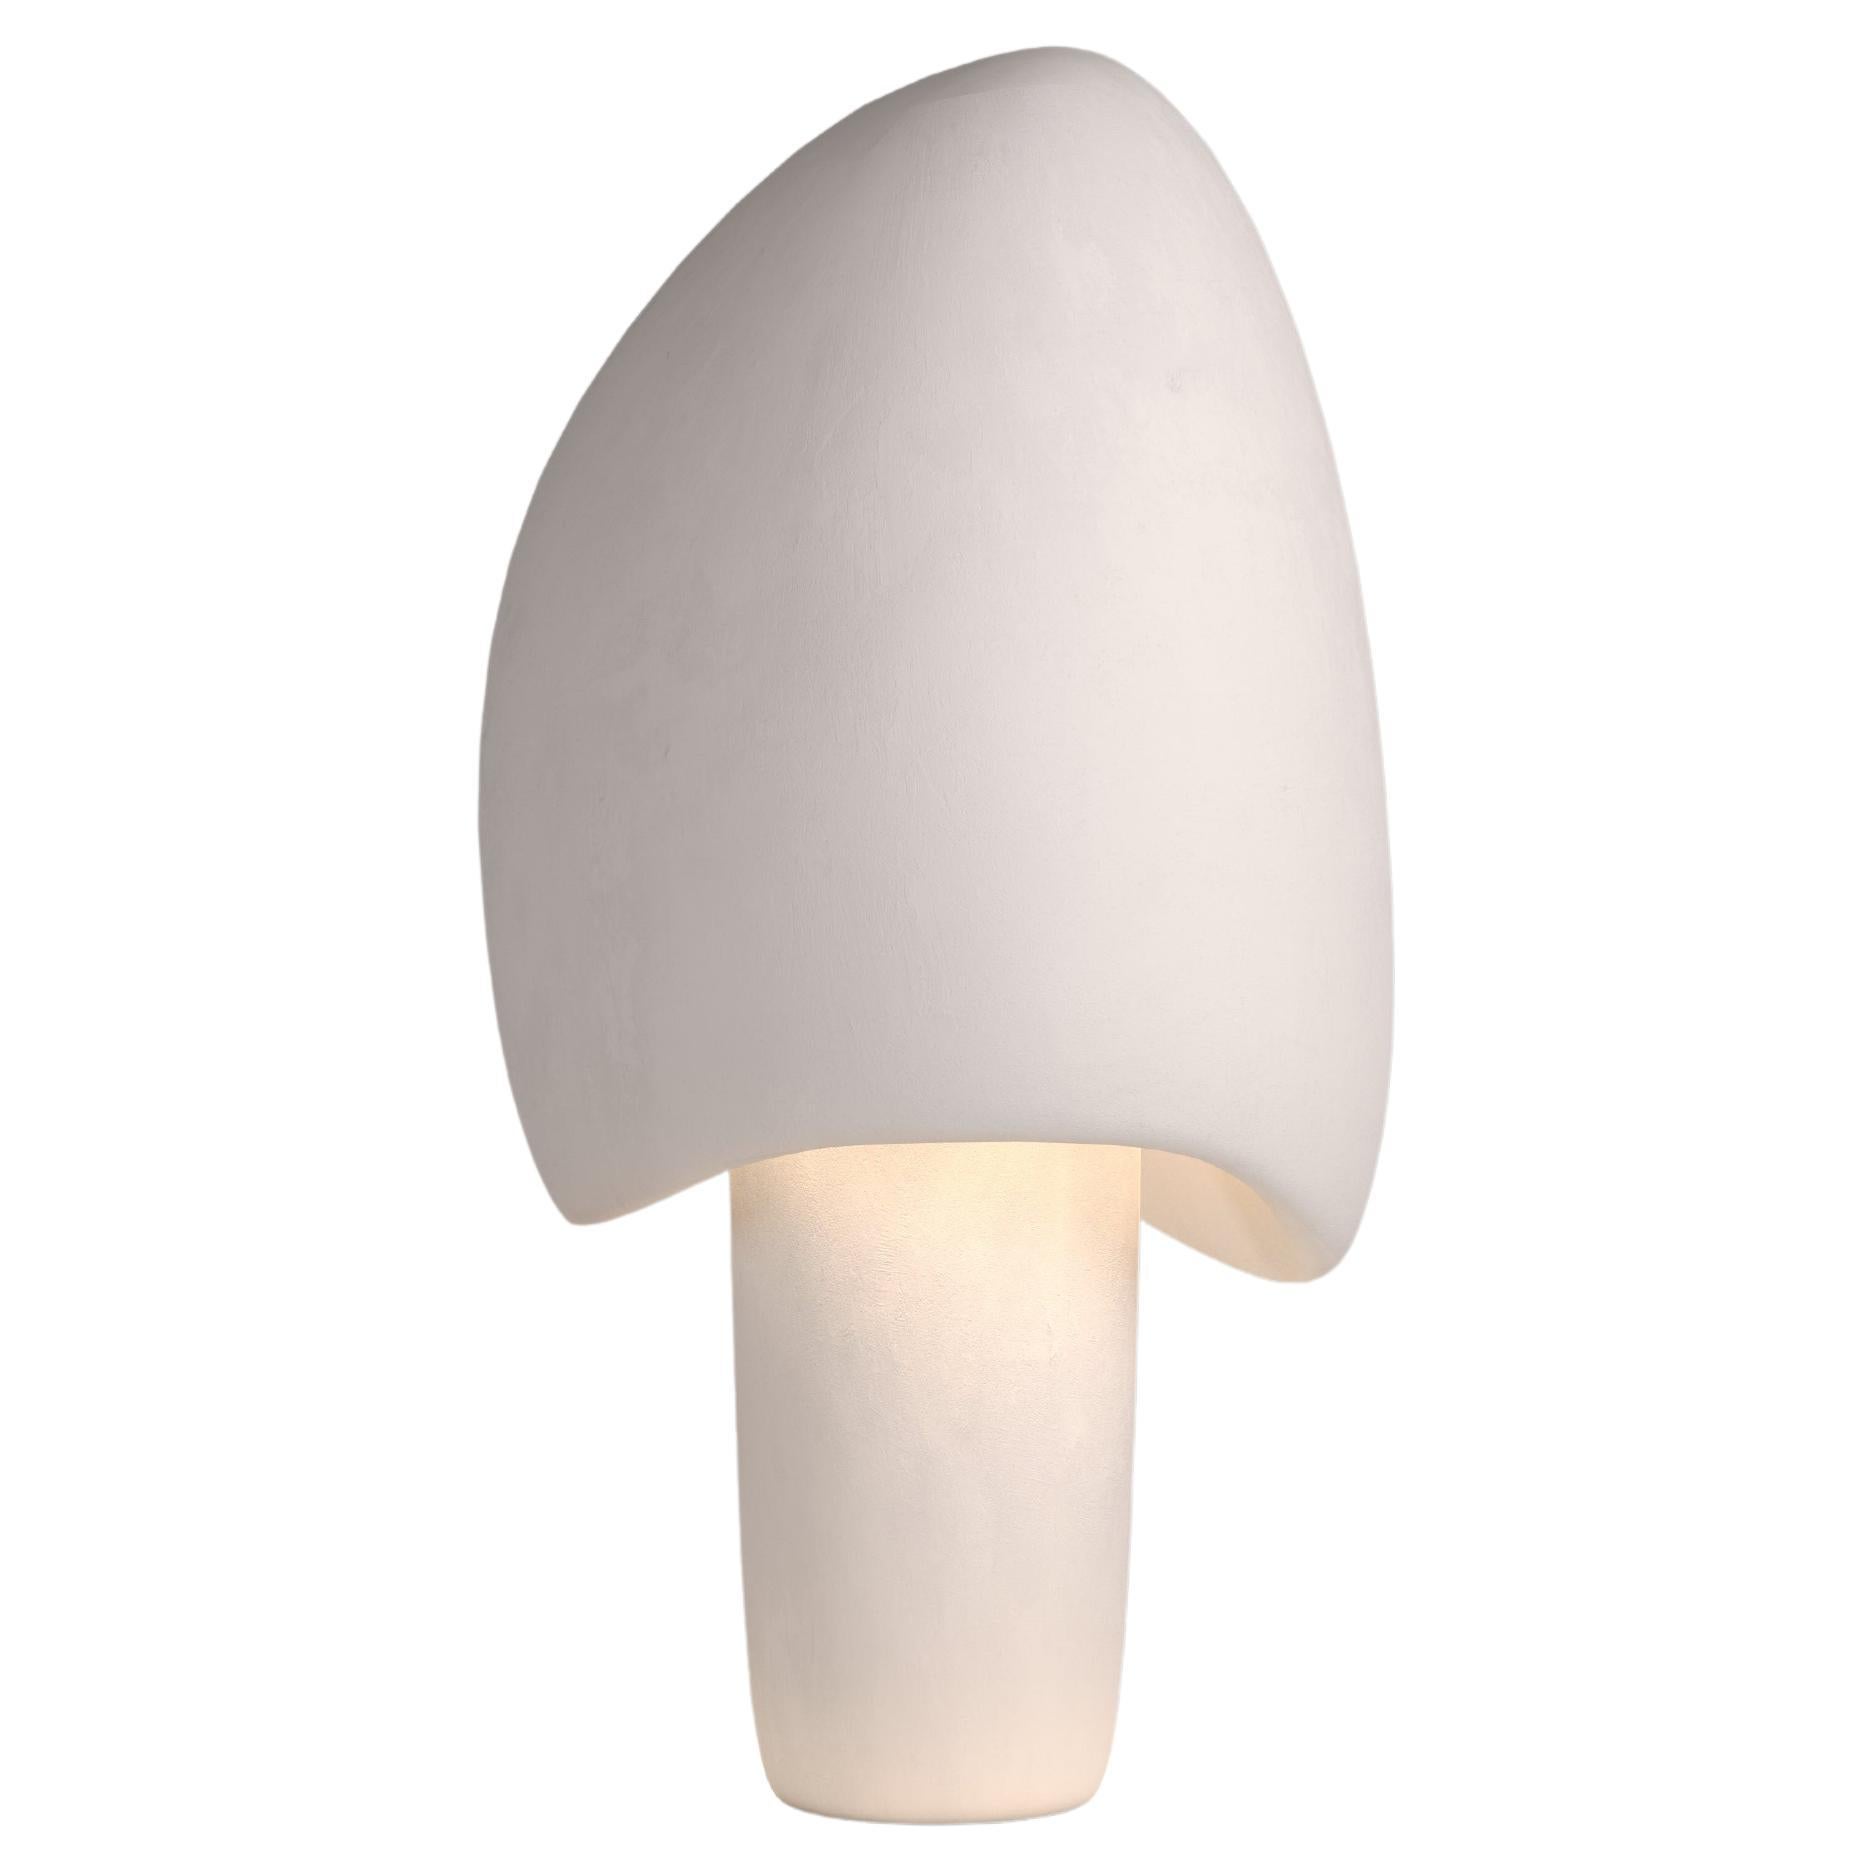 Craft Lamp MUSHROOM "LEHIT" Collection by MAKHNO